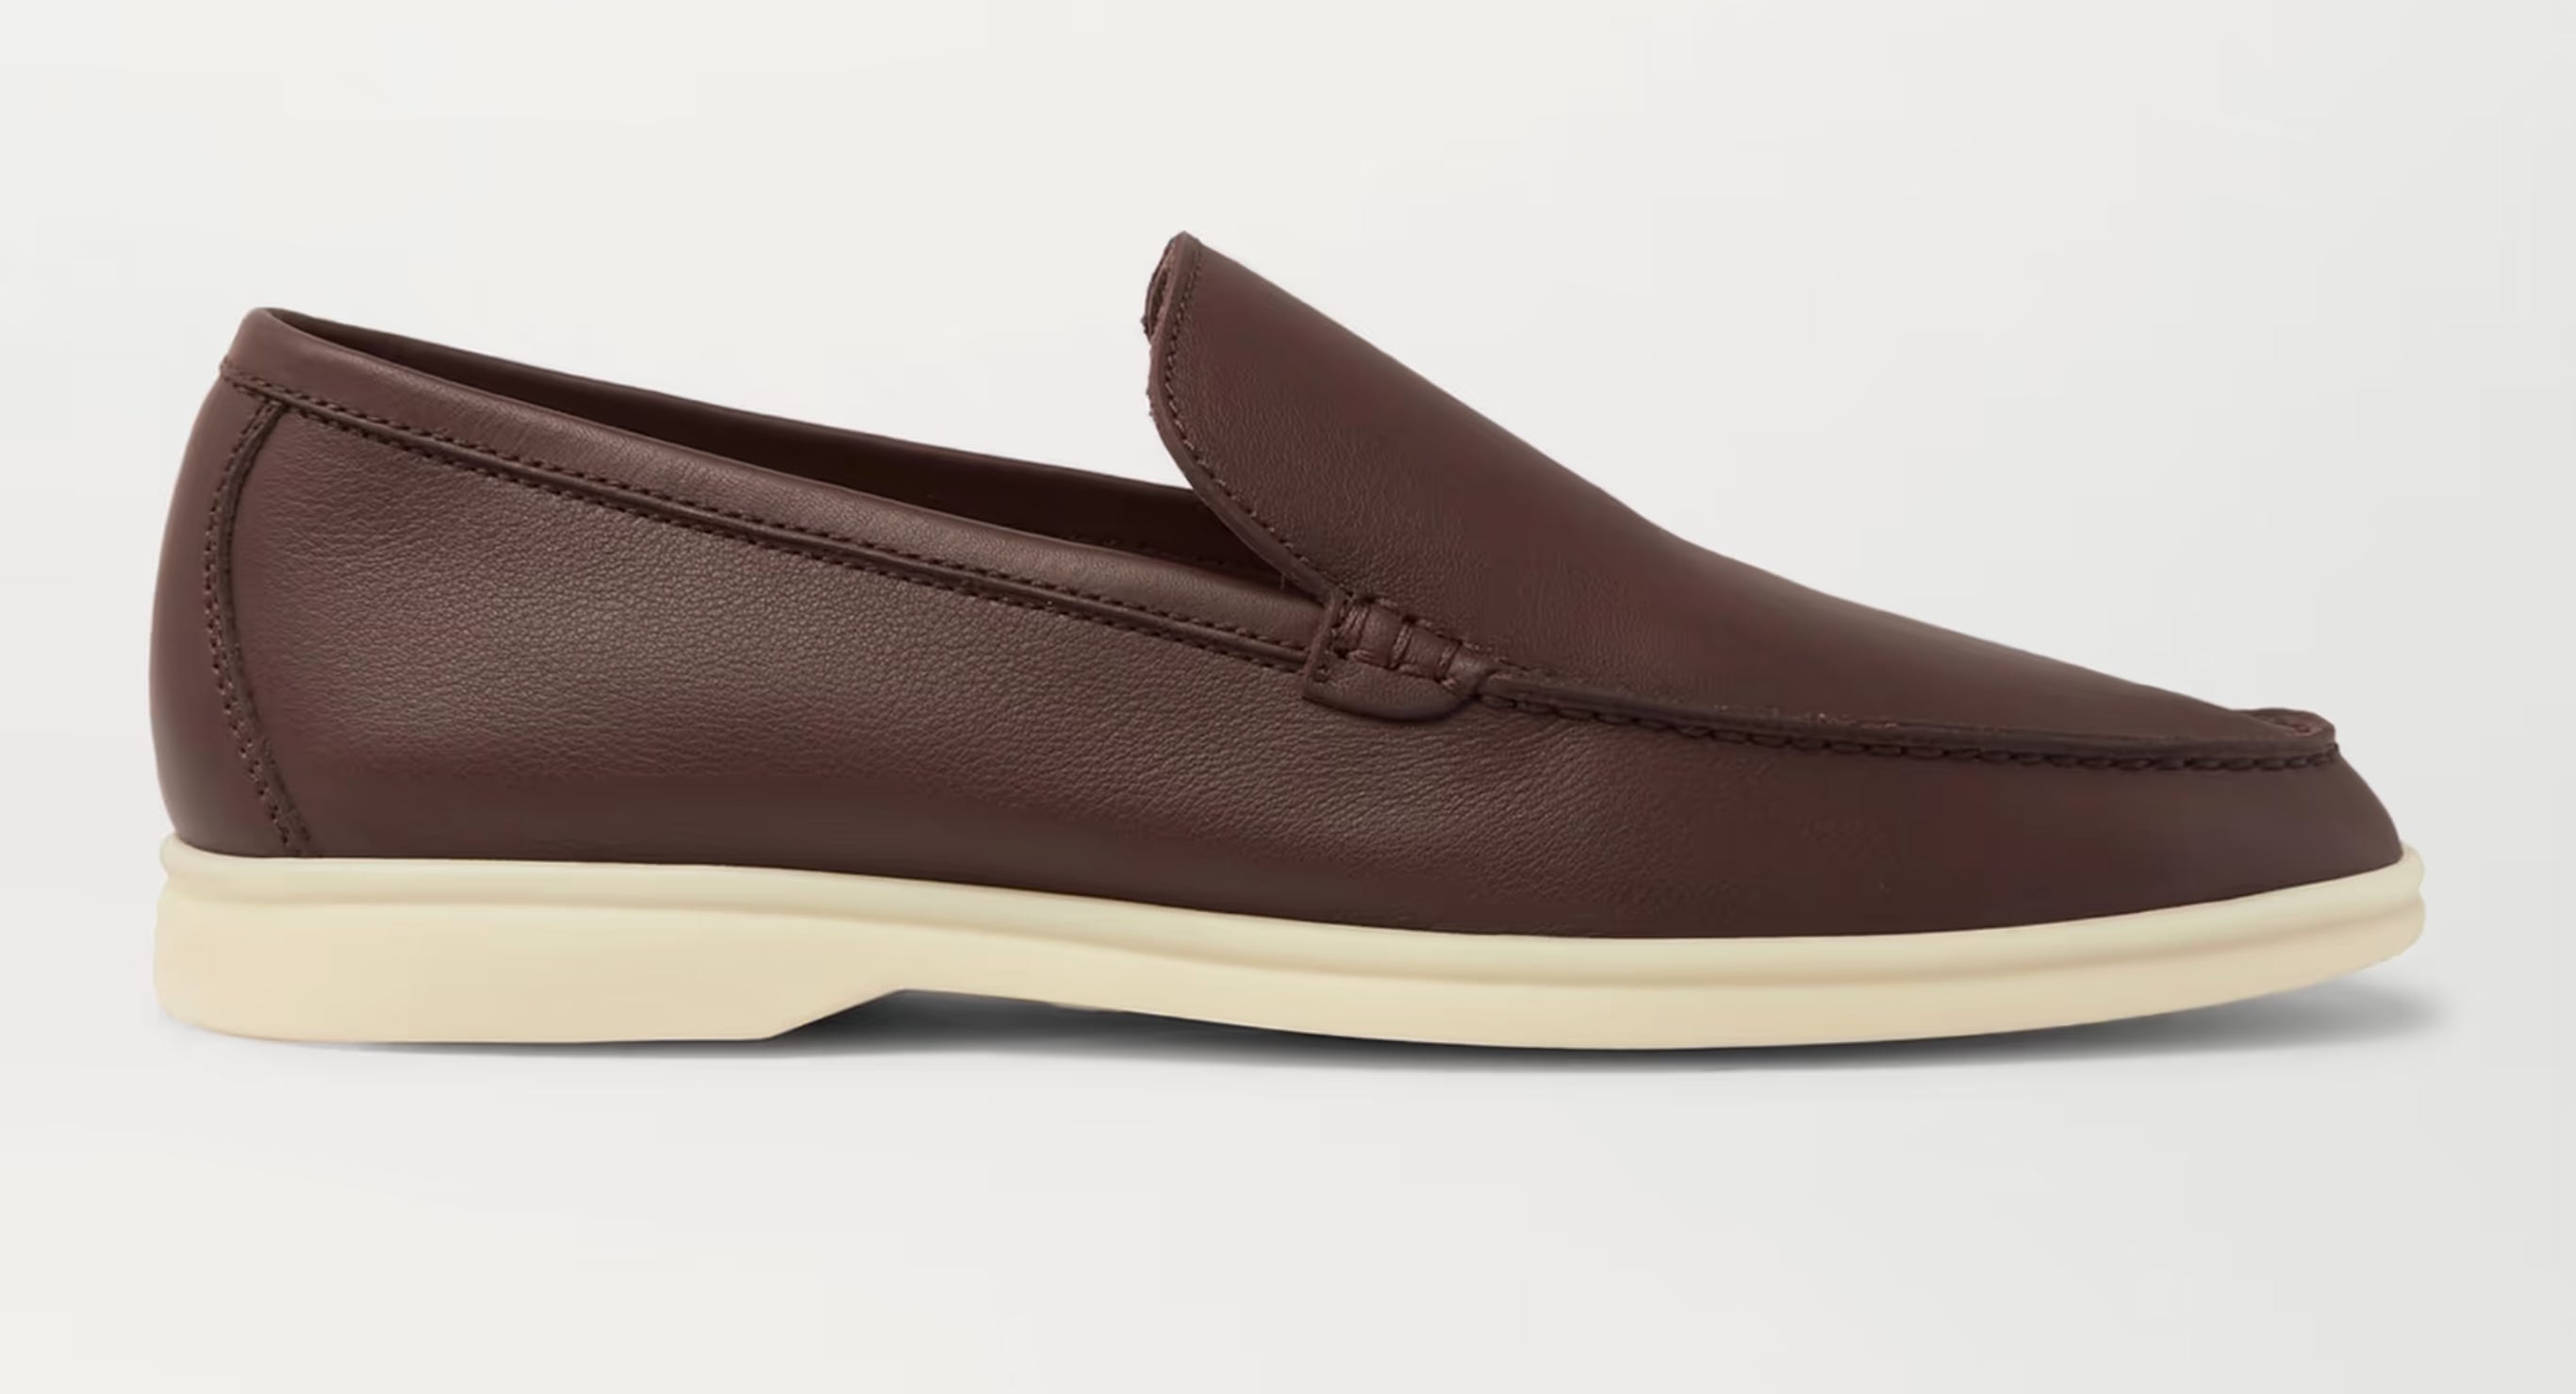 Succession: $4,000 for a pair of loafers? The discreet shoes that obsess  the wealthy, Society